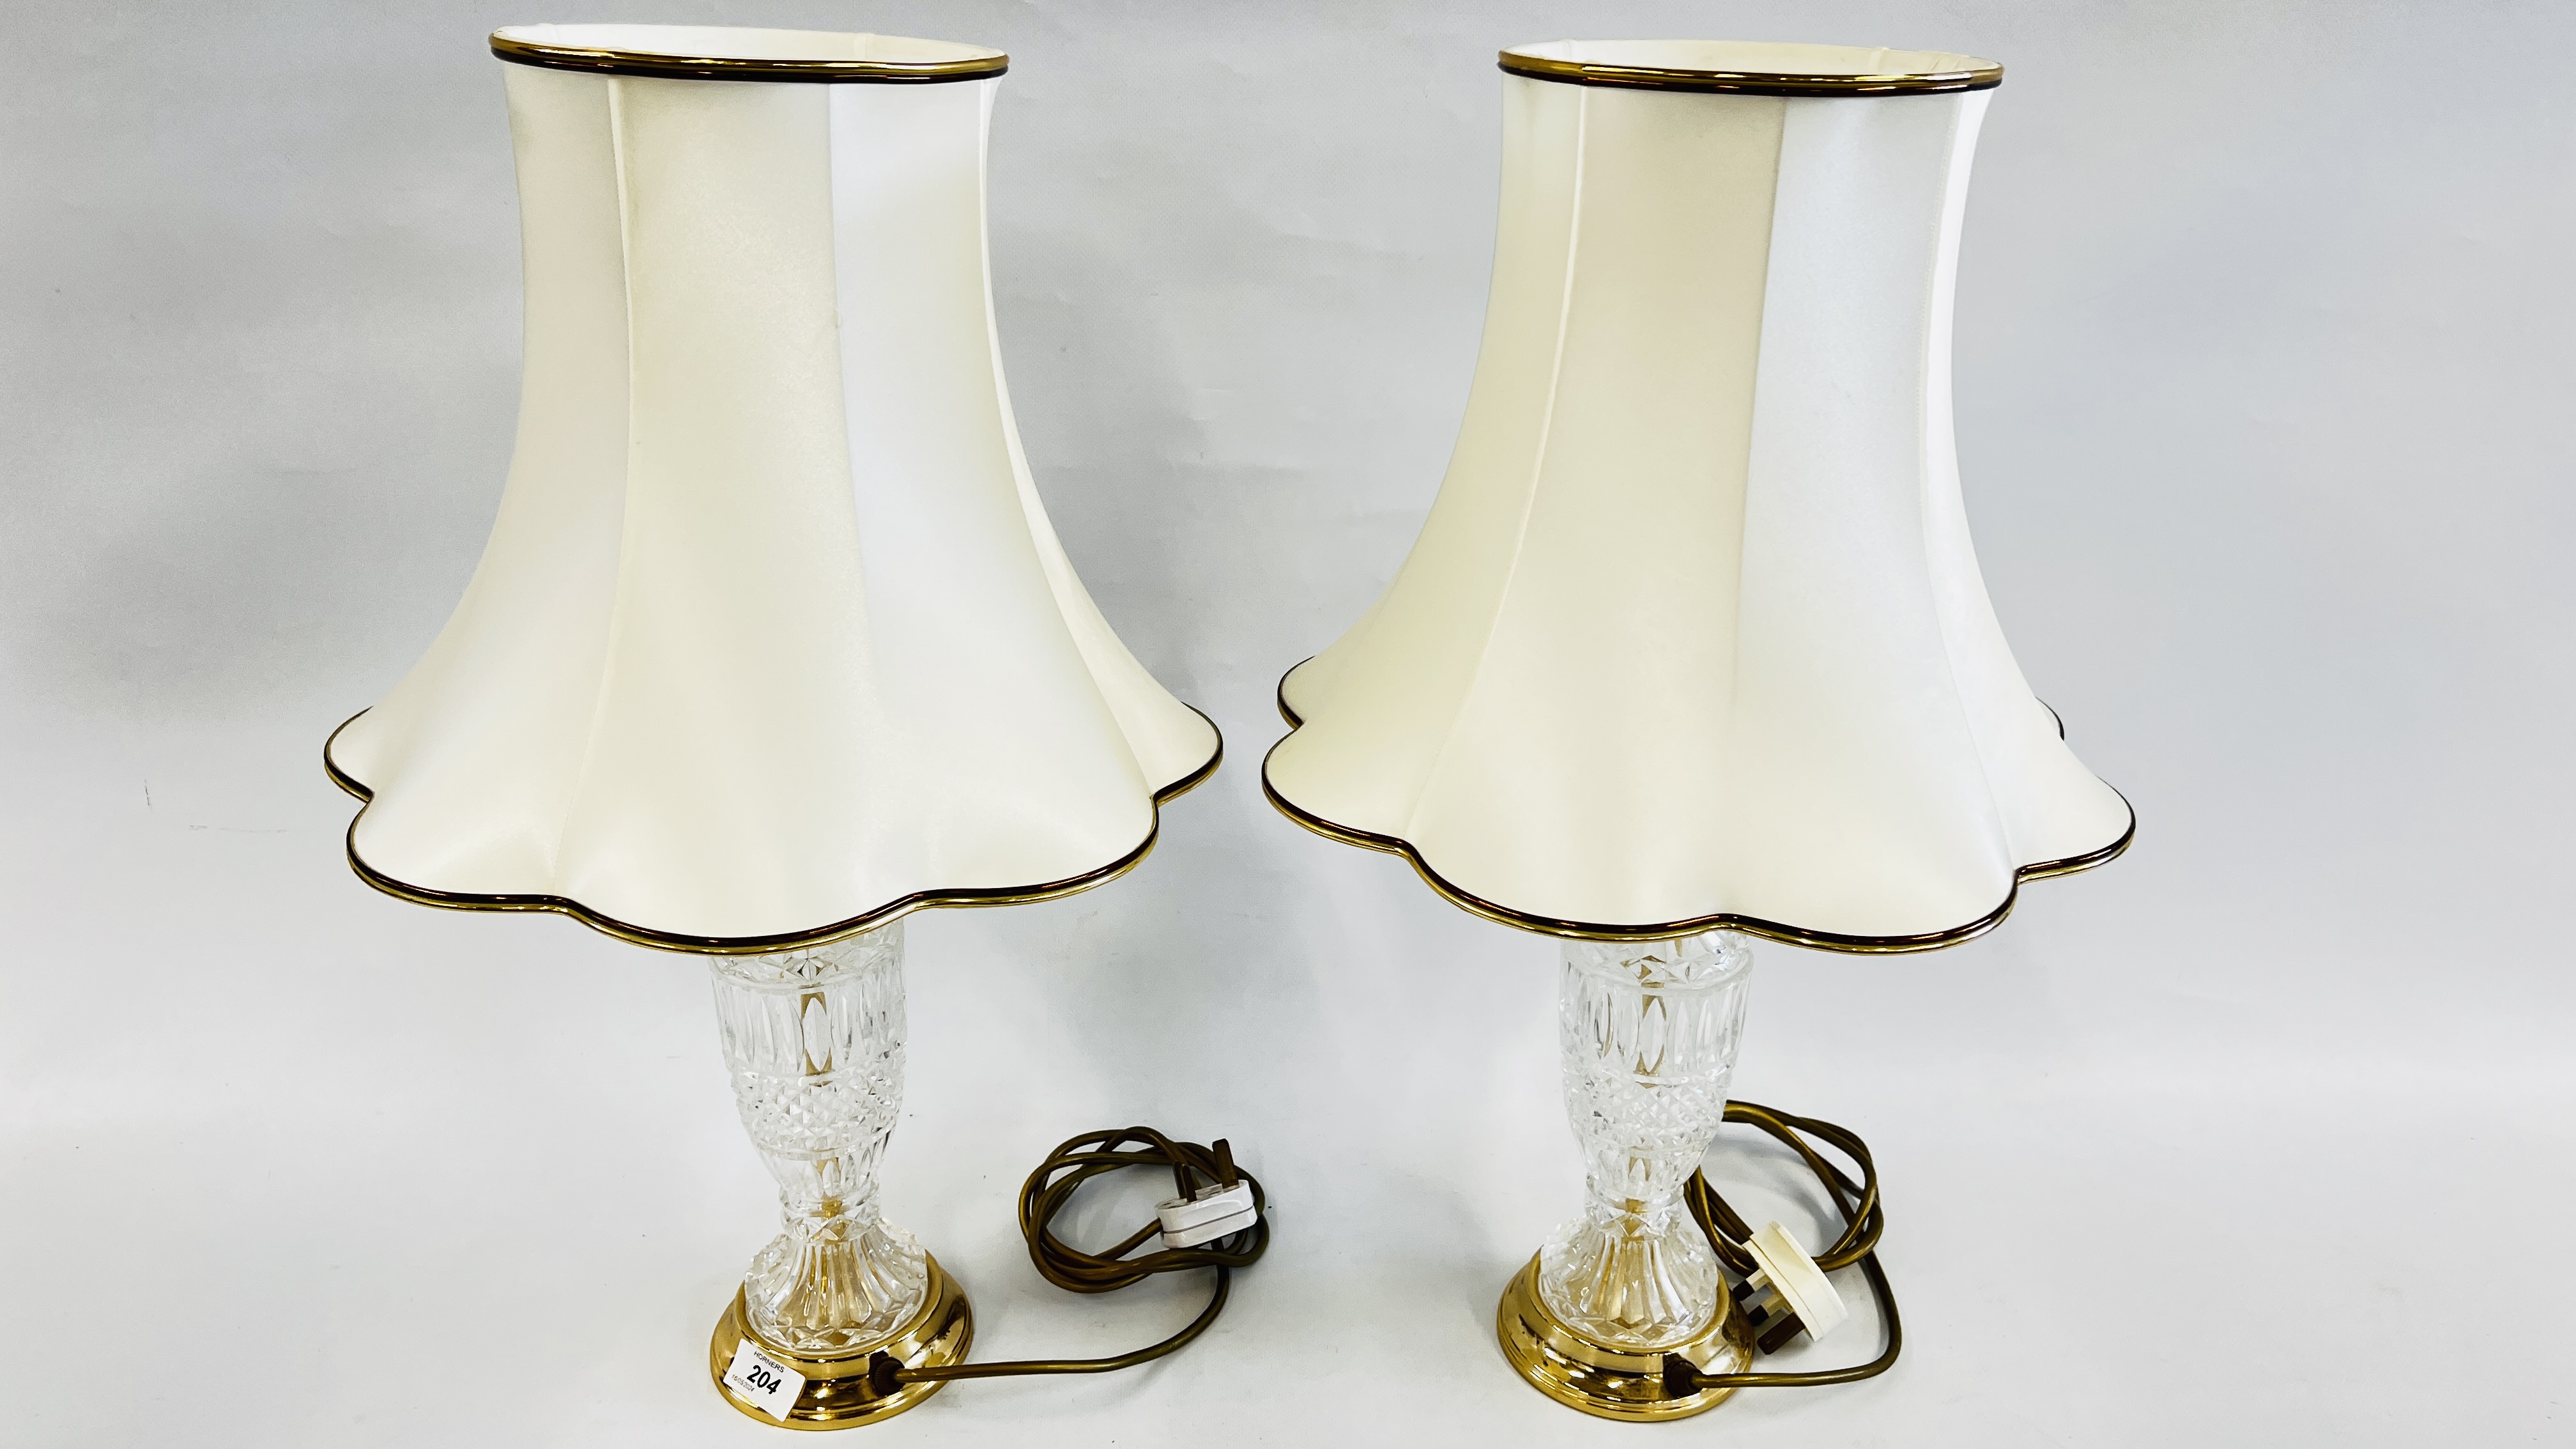 PAIR OF LEAD CRYSTAL TABLE LAMPS WITH CREAM SHADES, OVERALL HEIGHT 58CM - SOLD AS SEEN.